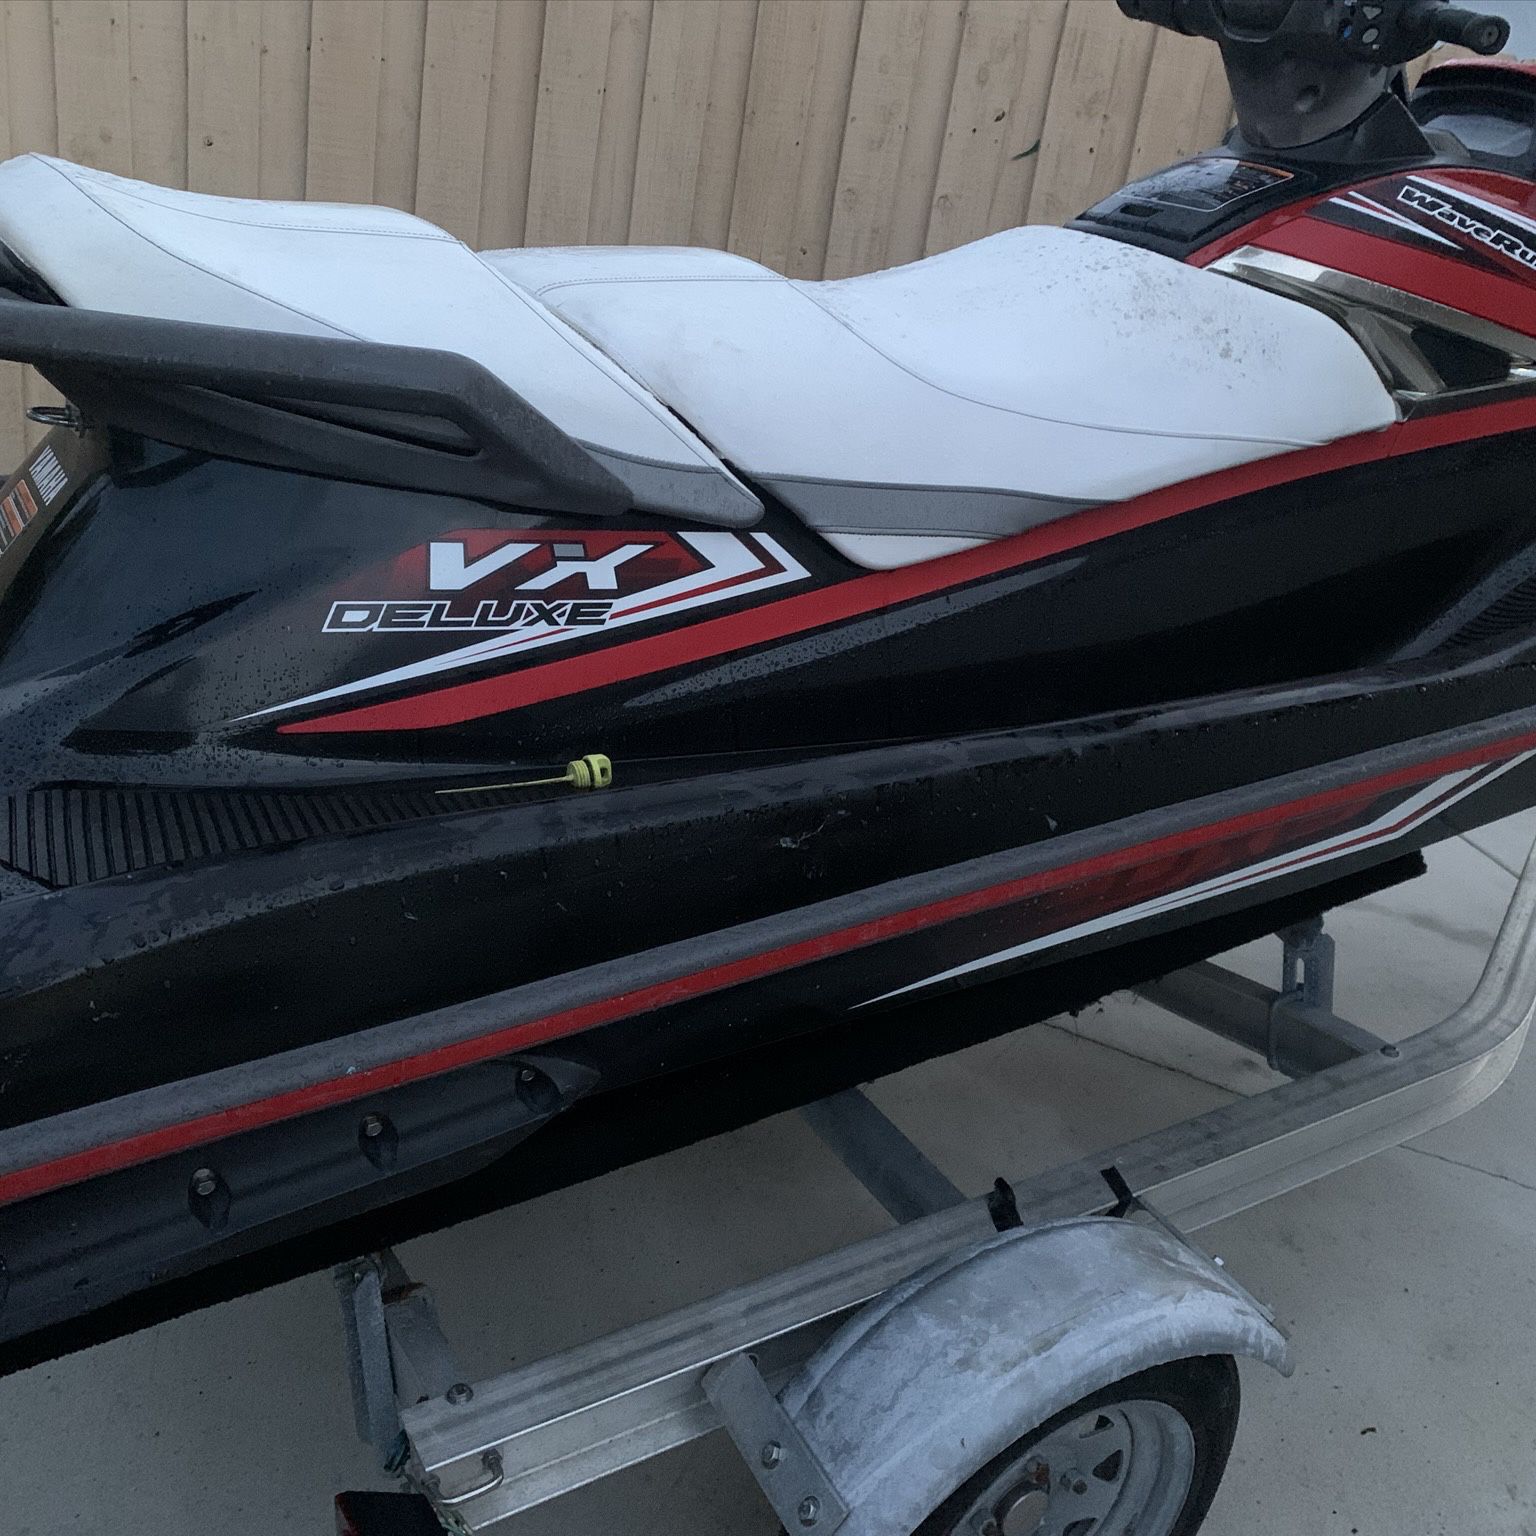 2016 Yamaha VX Deluxe Jet Ski Black And Red